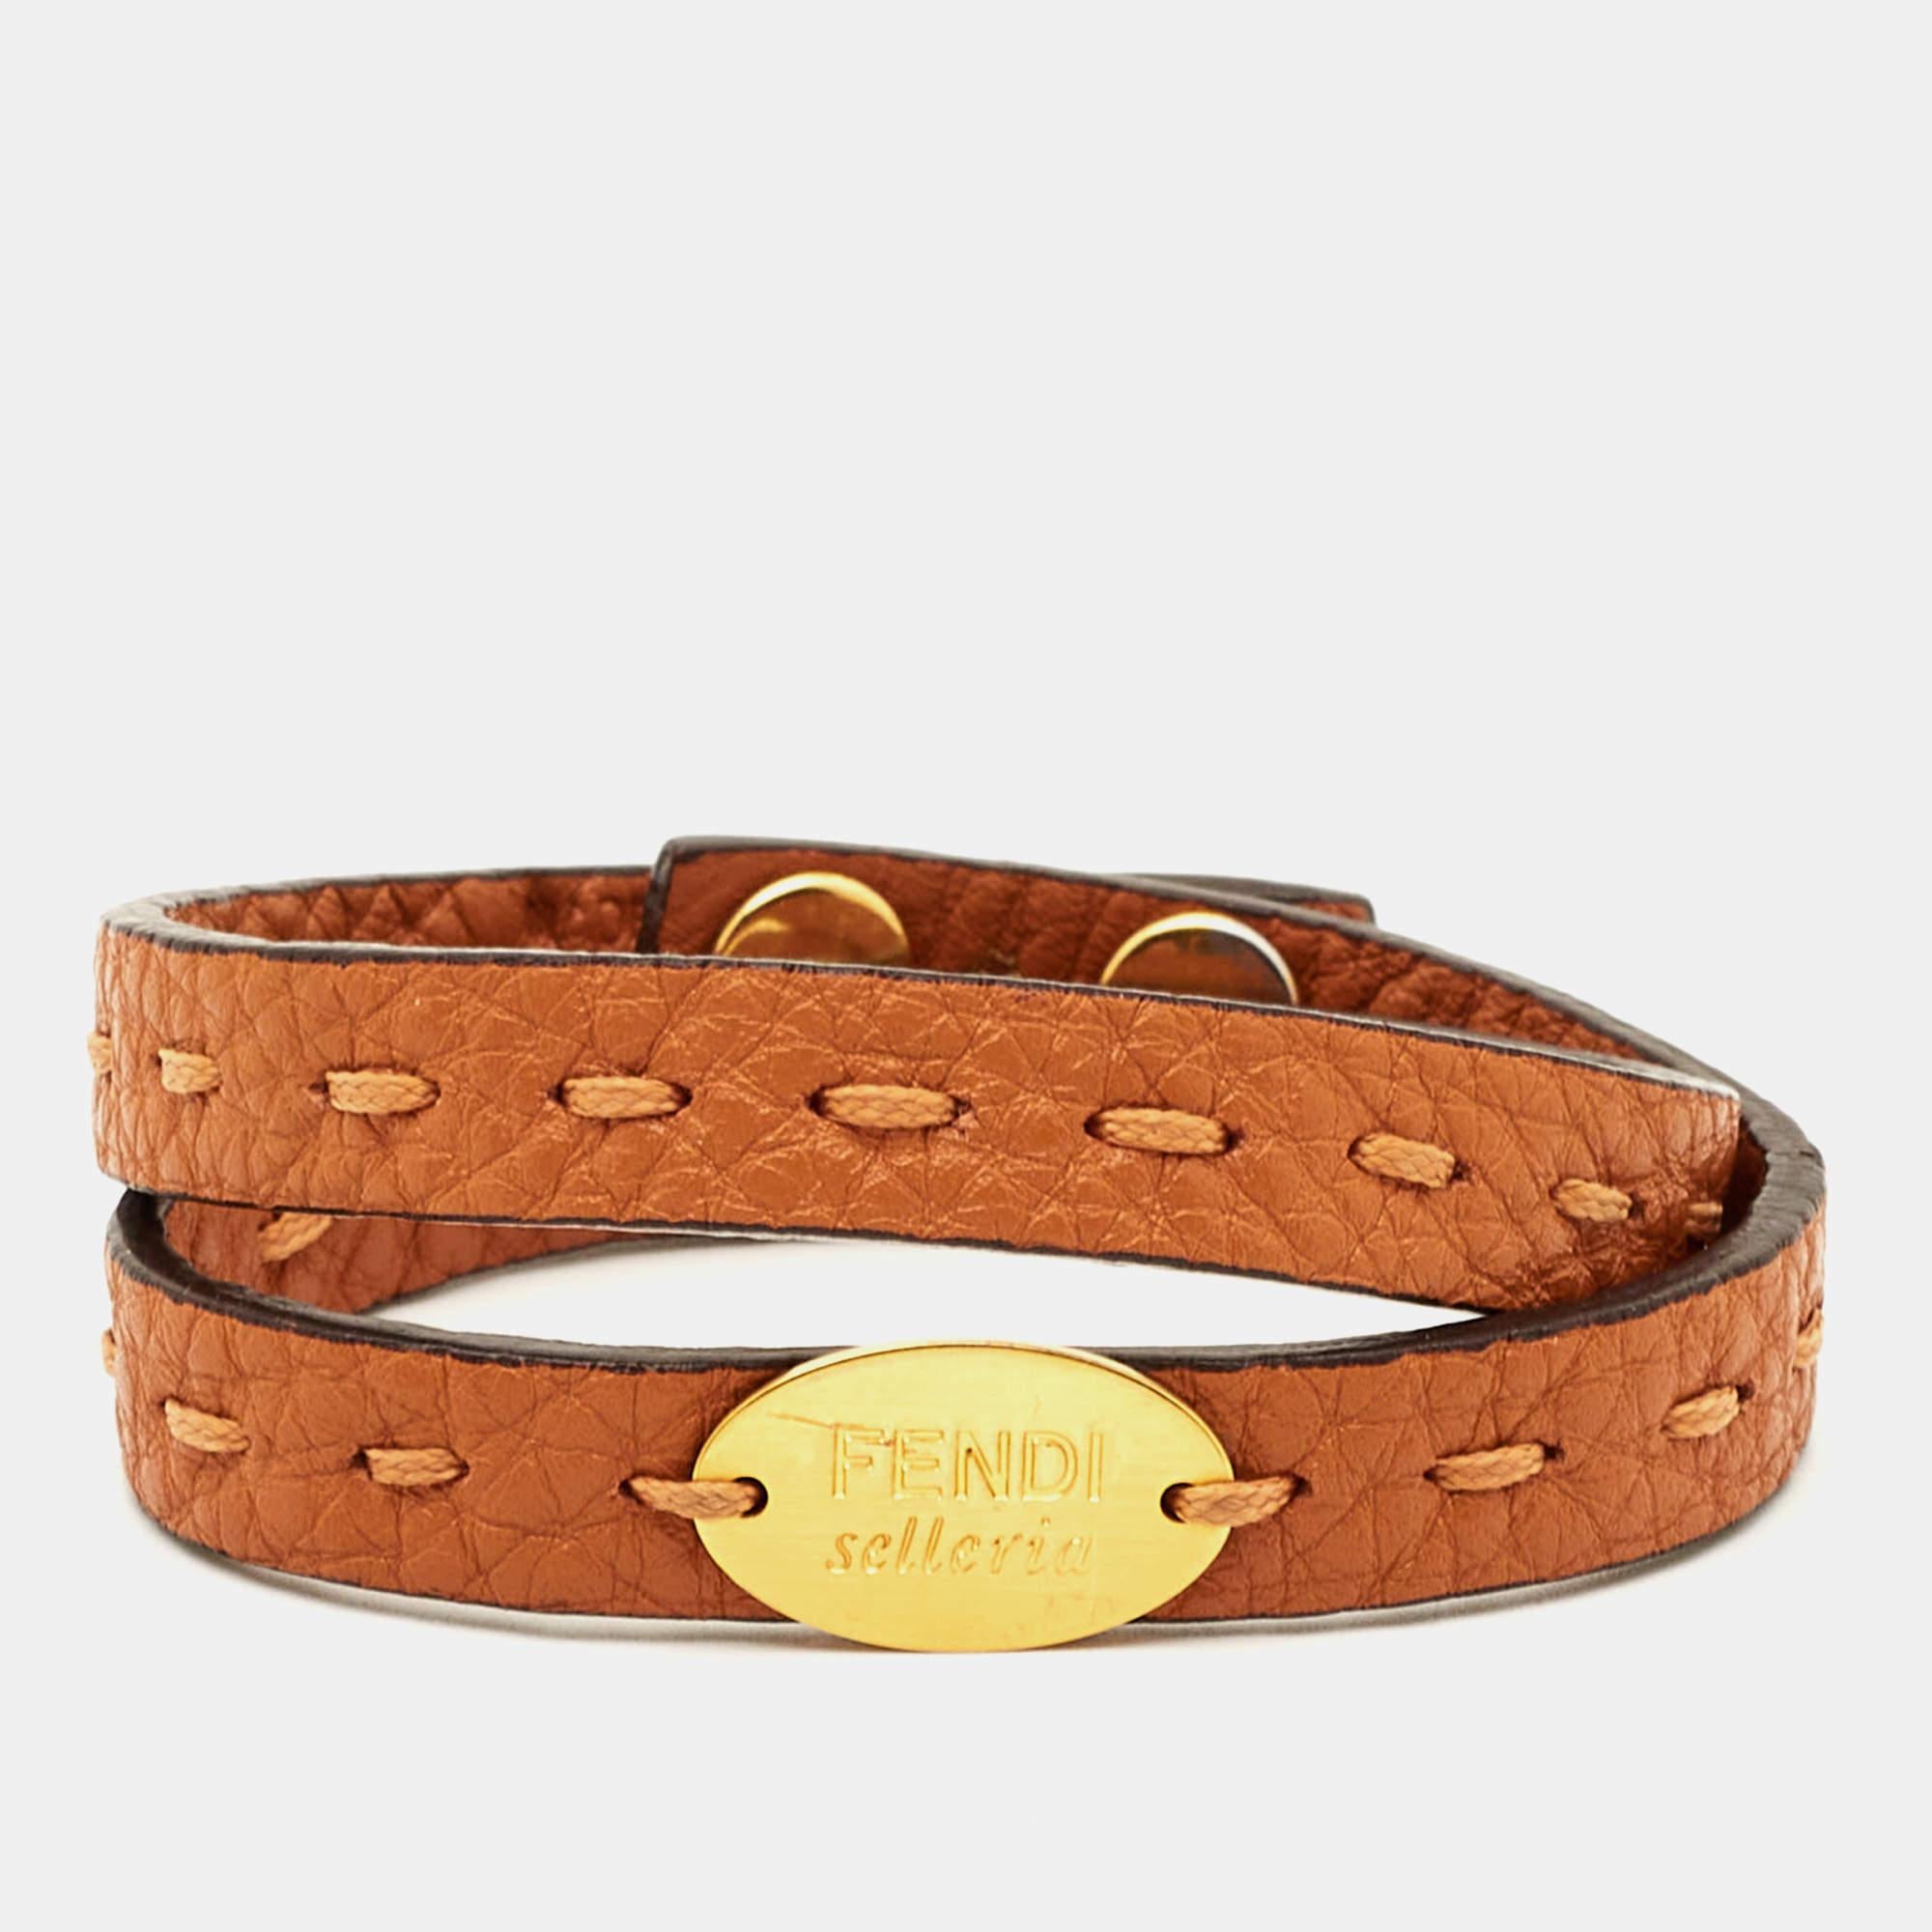 This Fendi double-wrap bracelet is made of leather and gold-tone metal. It has the Selleria all over for a signature finish.

